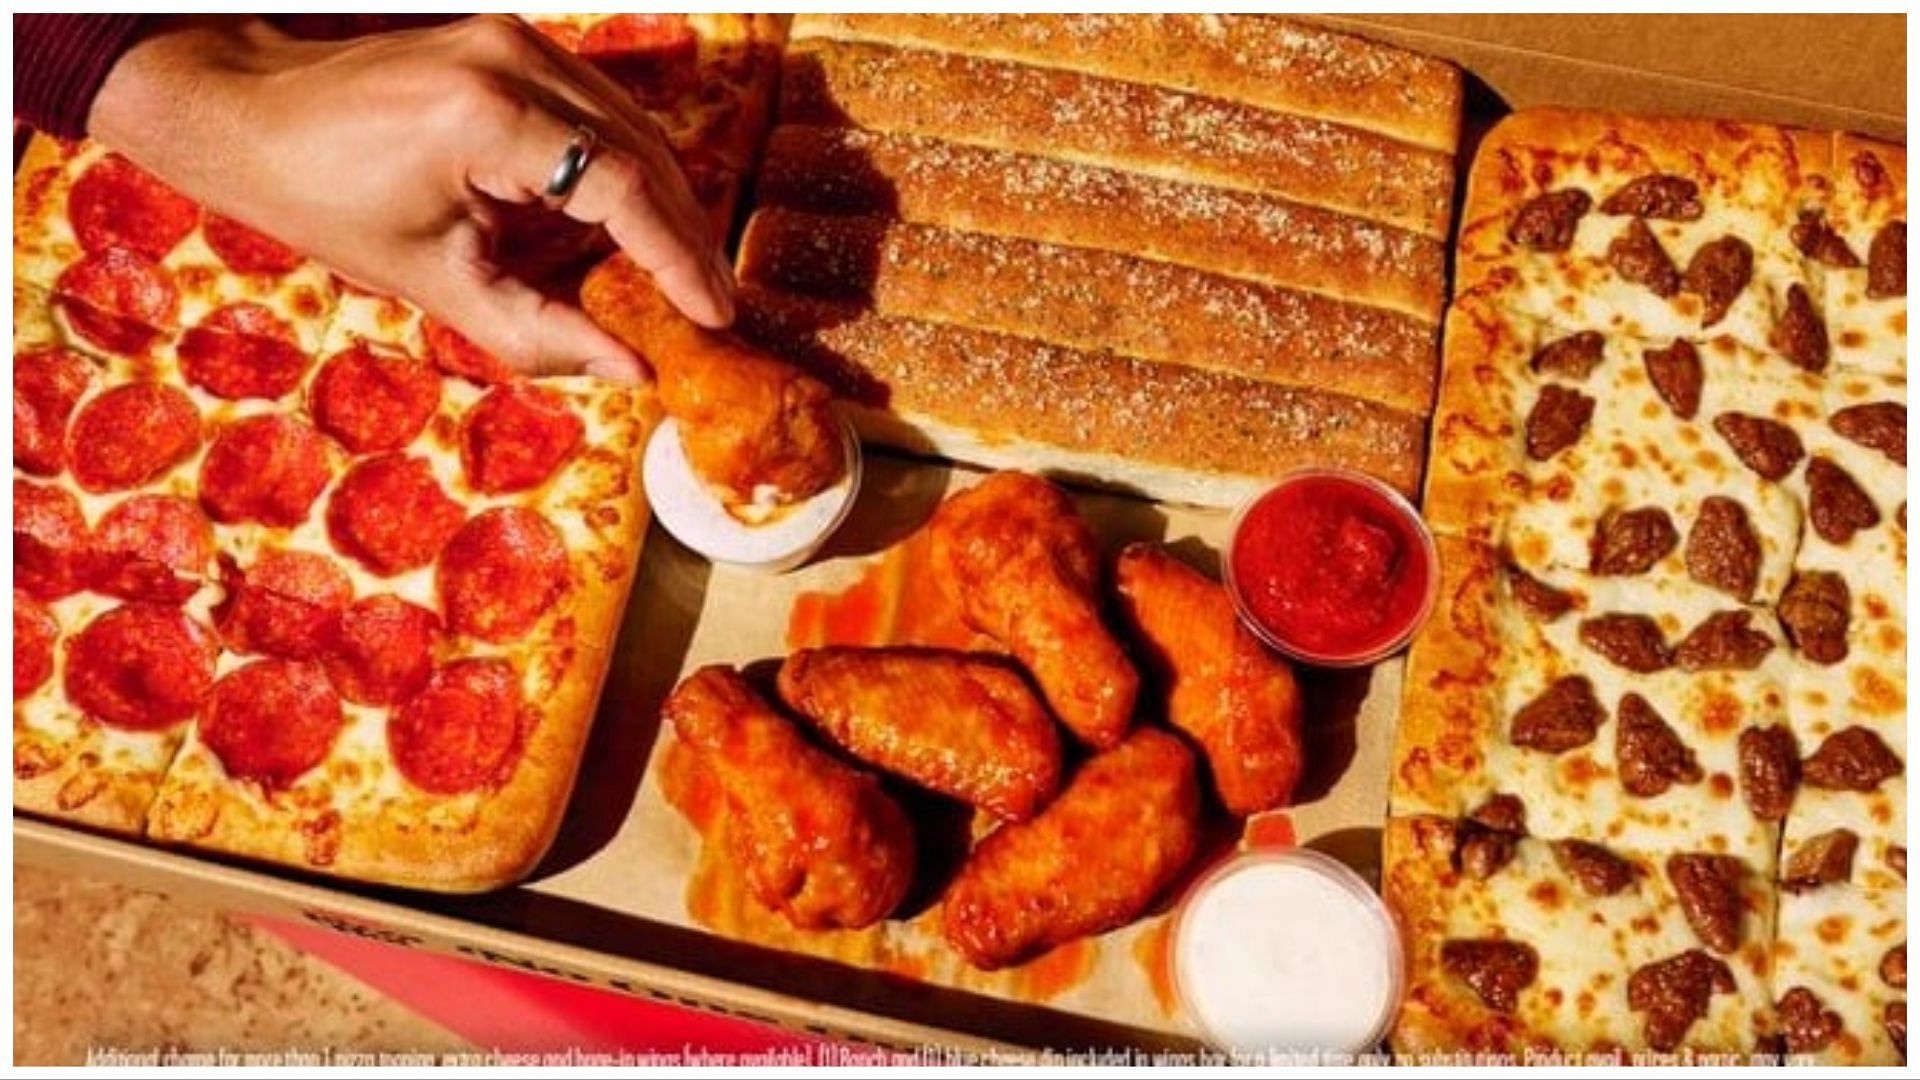 The brand is back with the dinner box (Image via Pizza Hut)